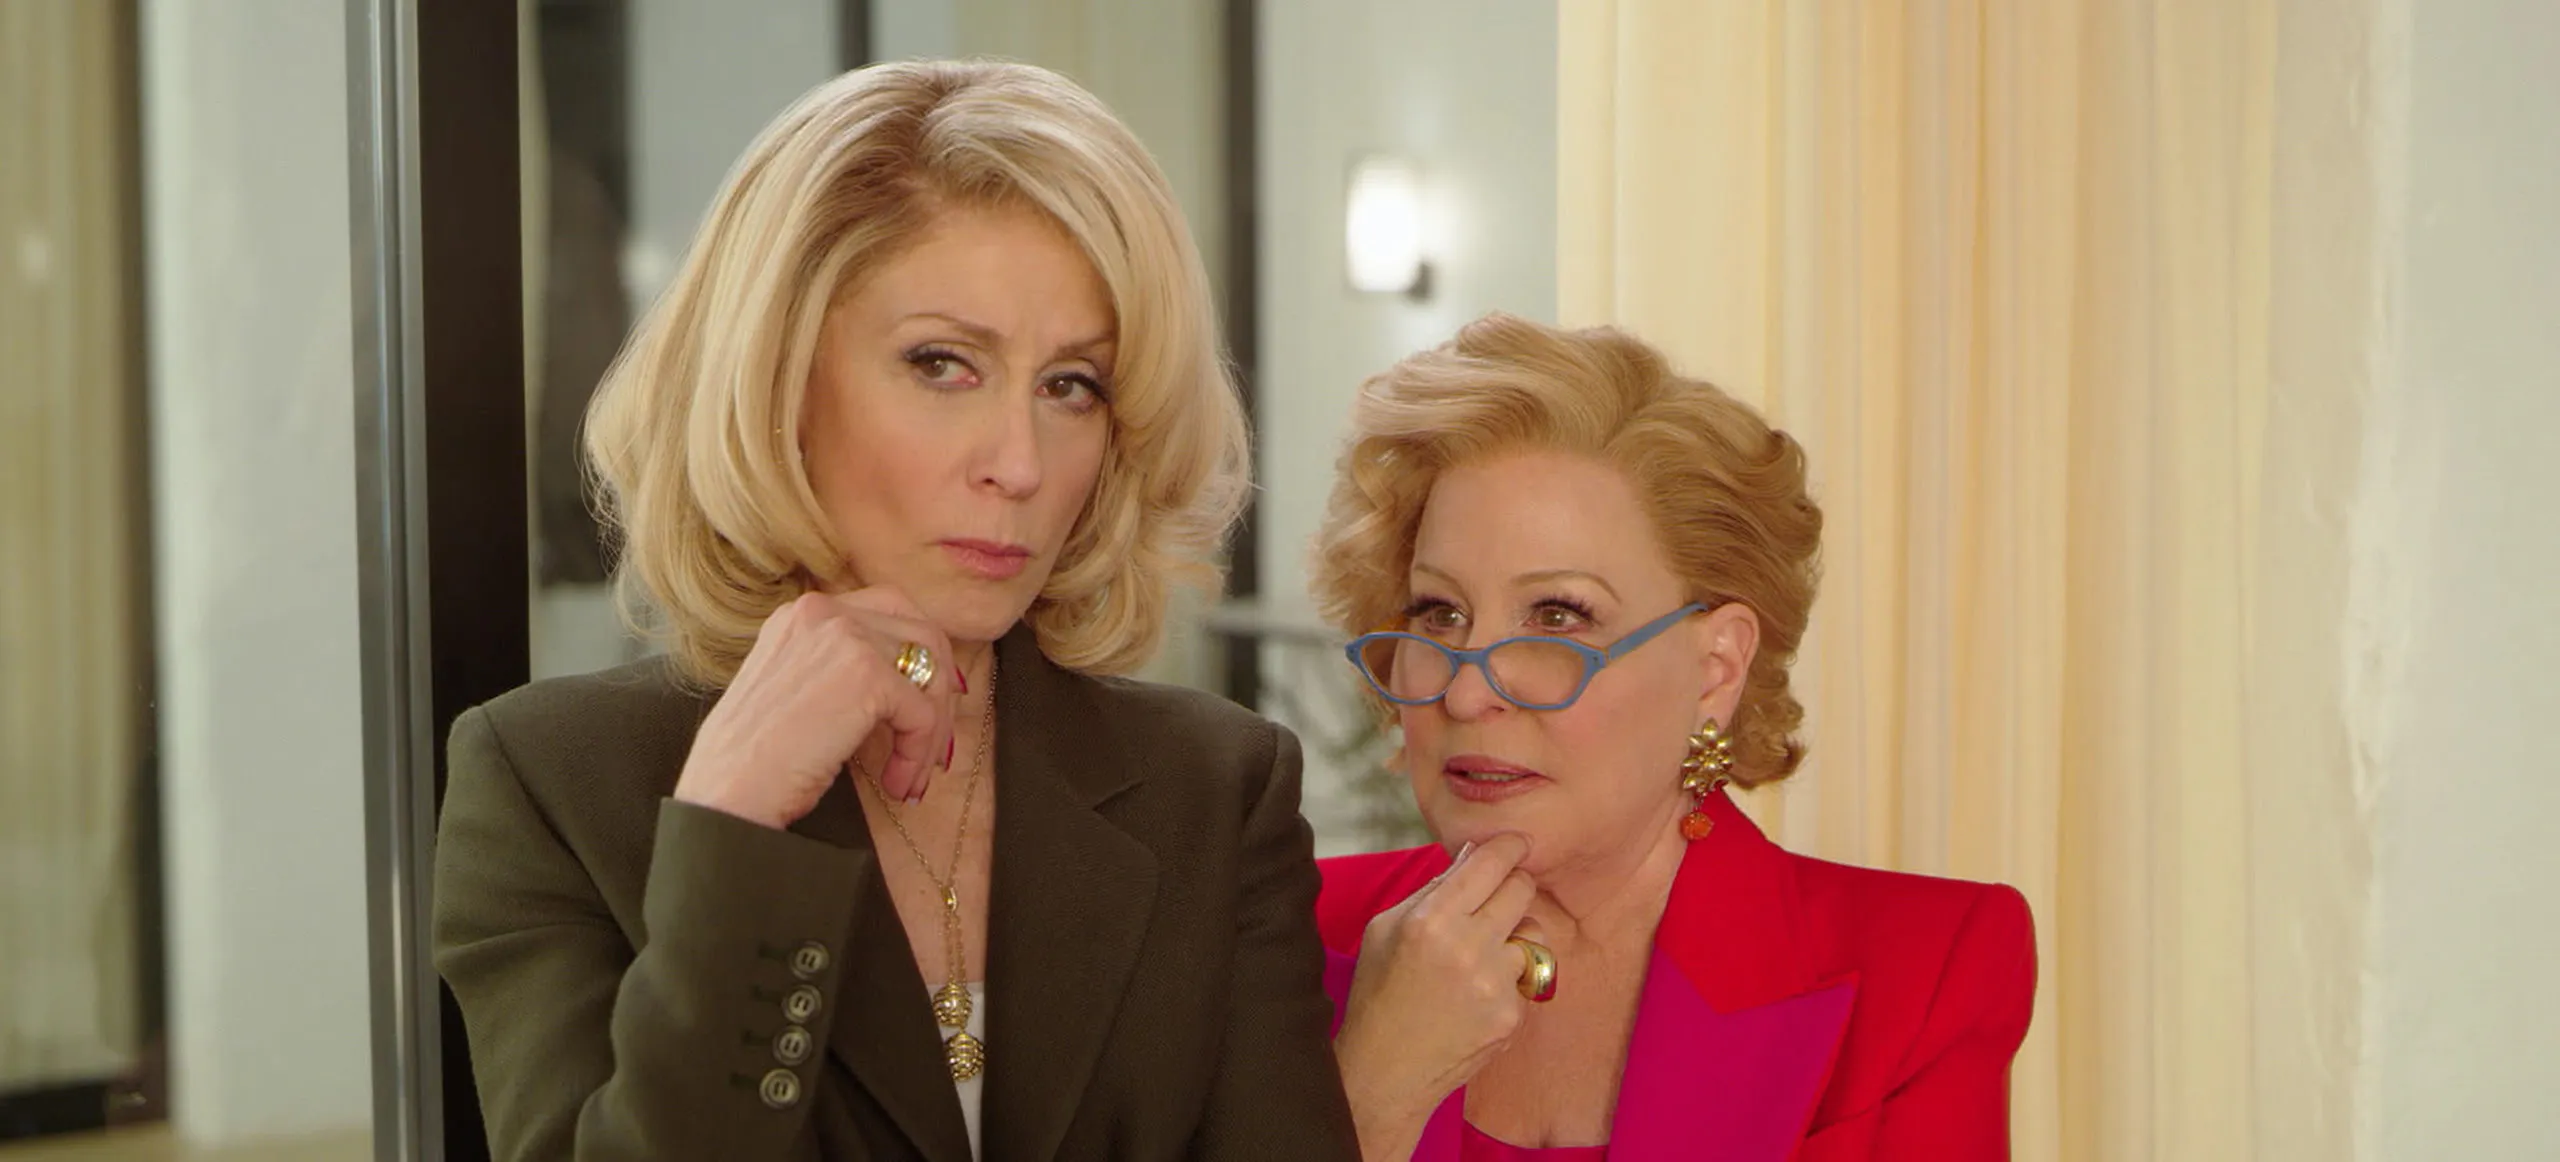 Judith Light as Dede Standish and Bette Midler as Hadassah Gold in The Politician 